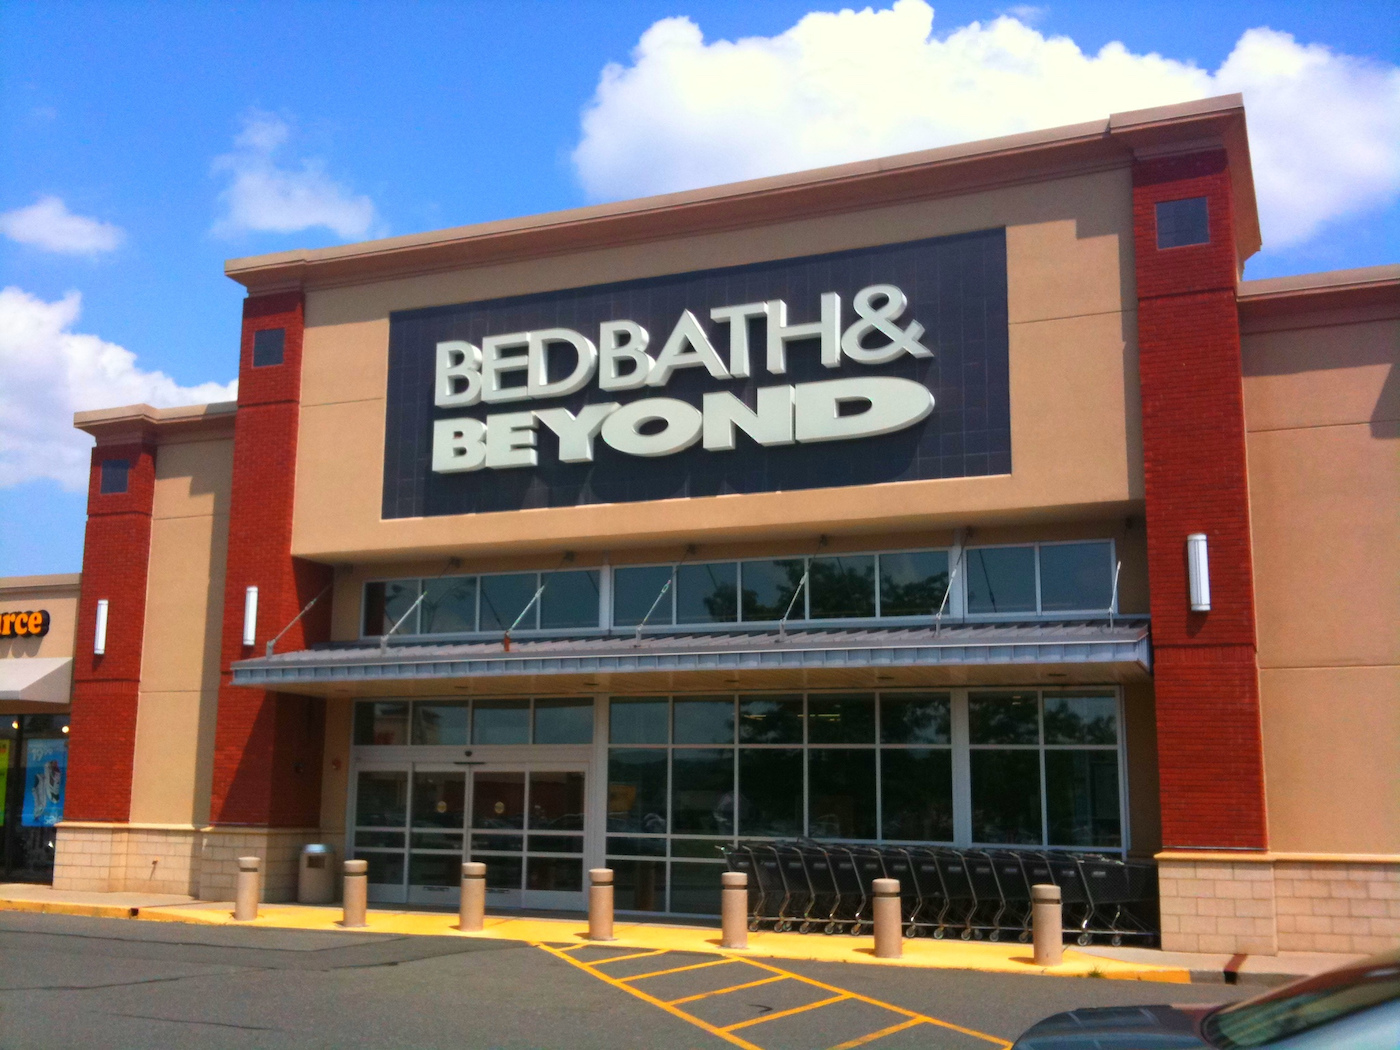 Bed, Bath & Beyond stores closed, but website relaunches through